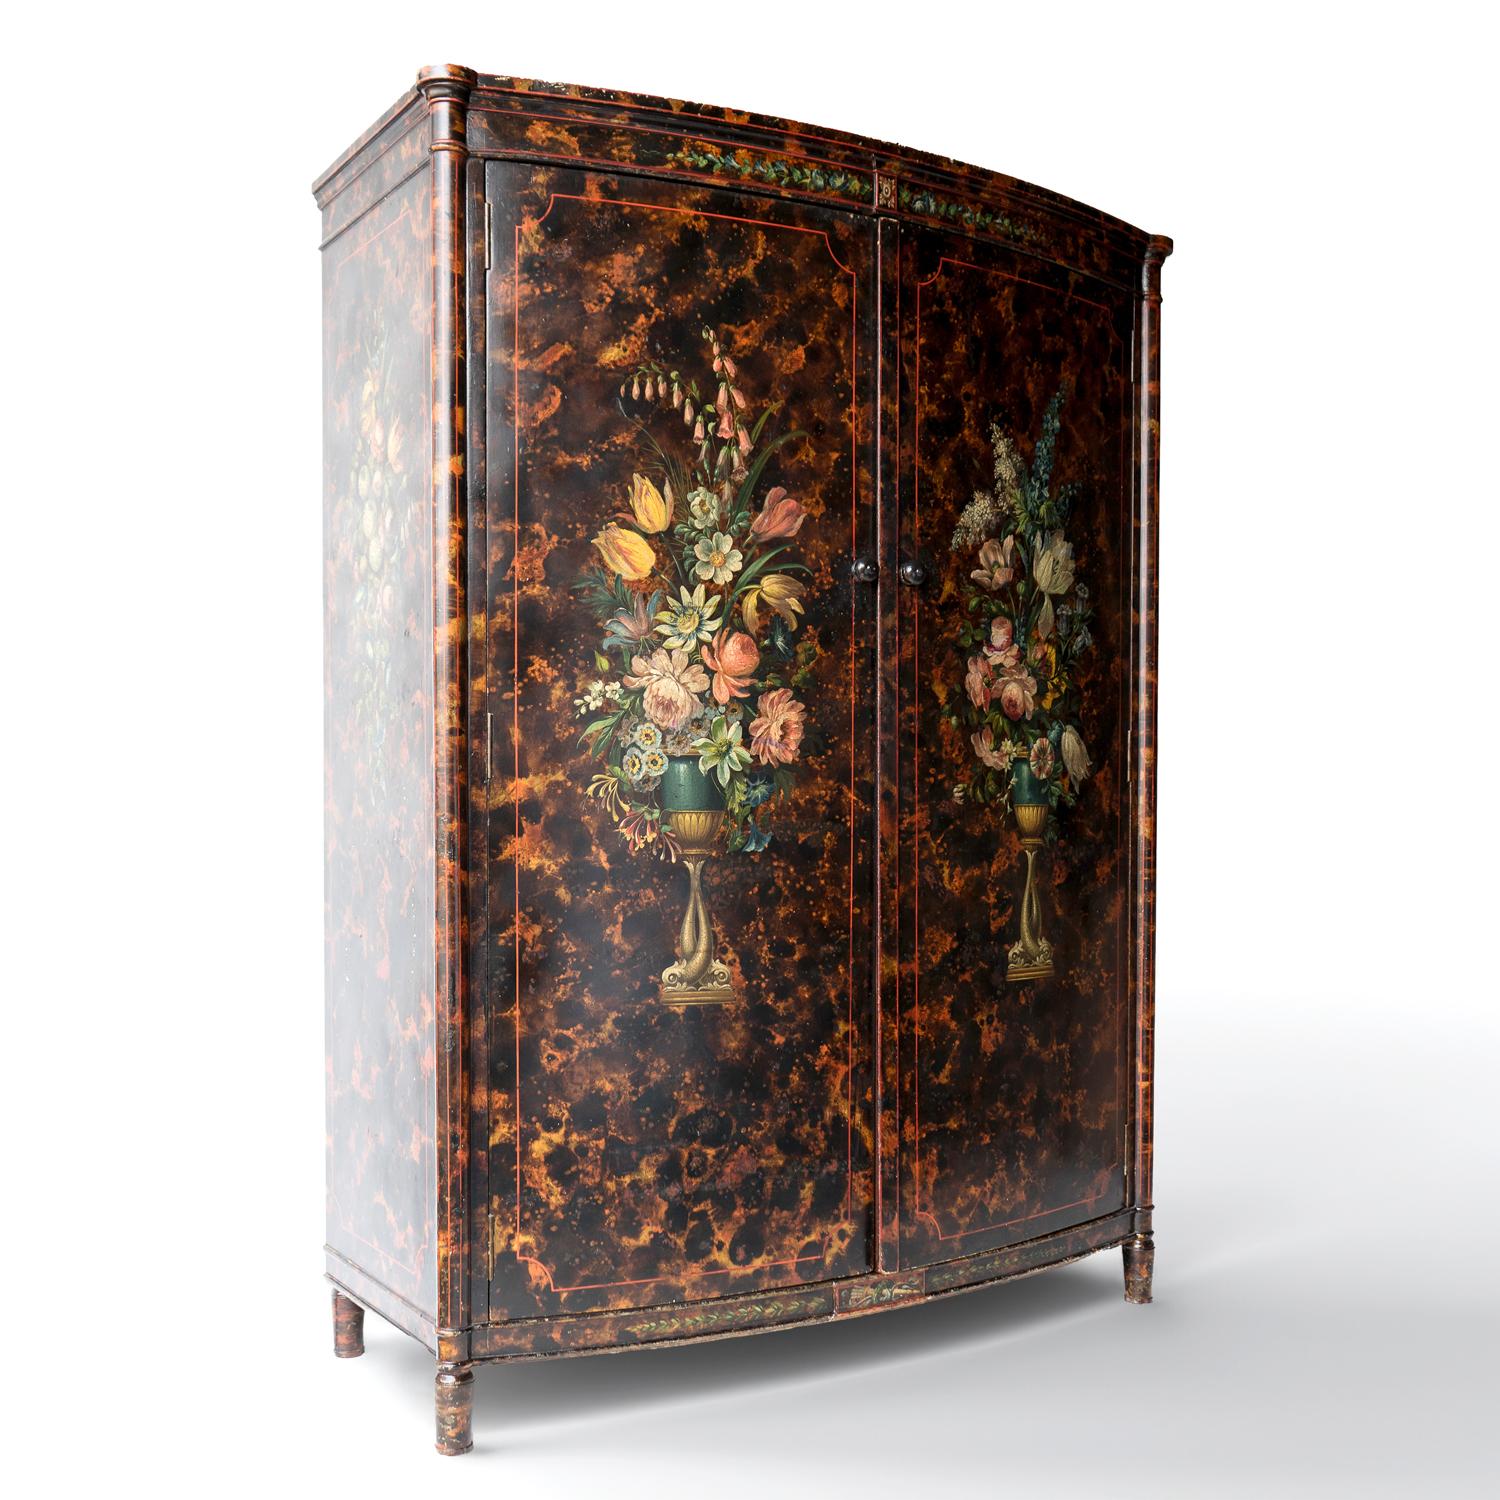 Italian Antique Venetian Faux Tortoiseshell And Floral Painted Wardrobe